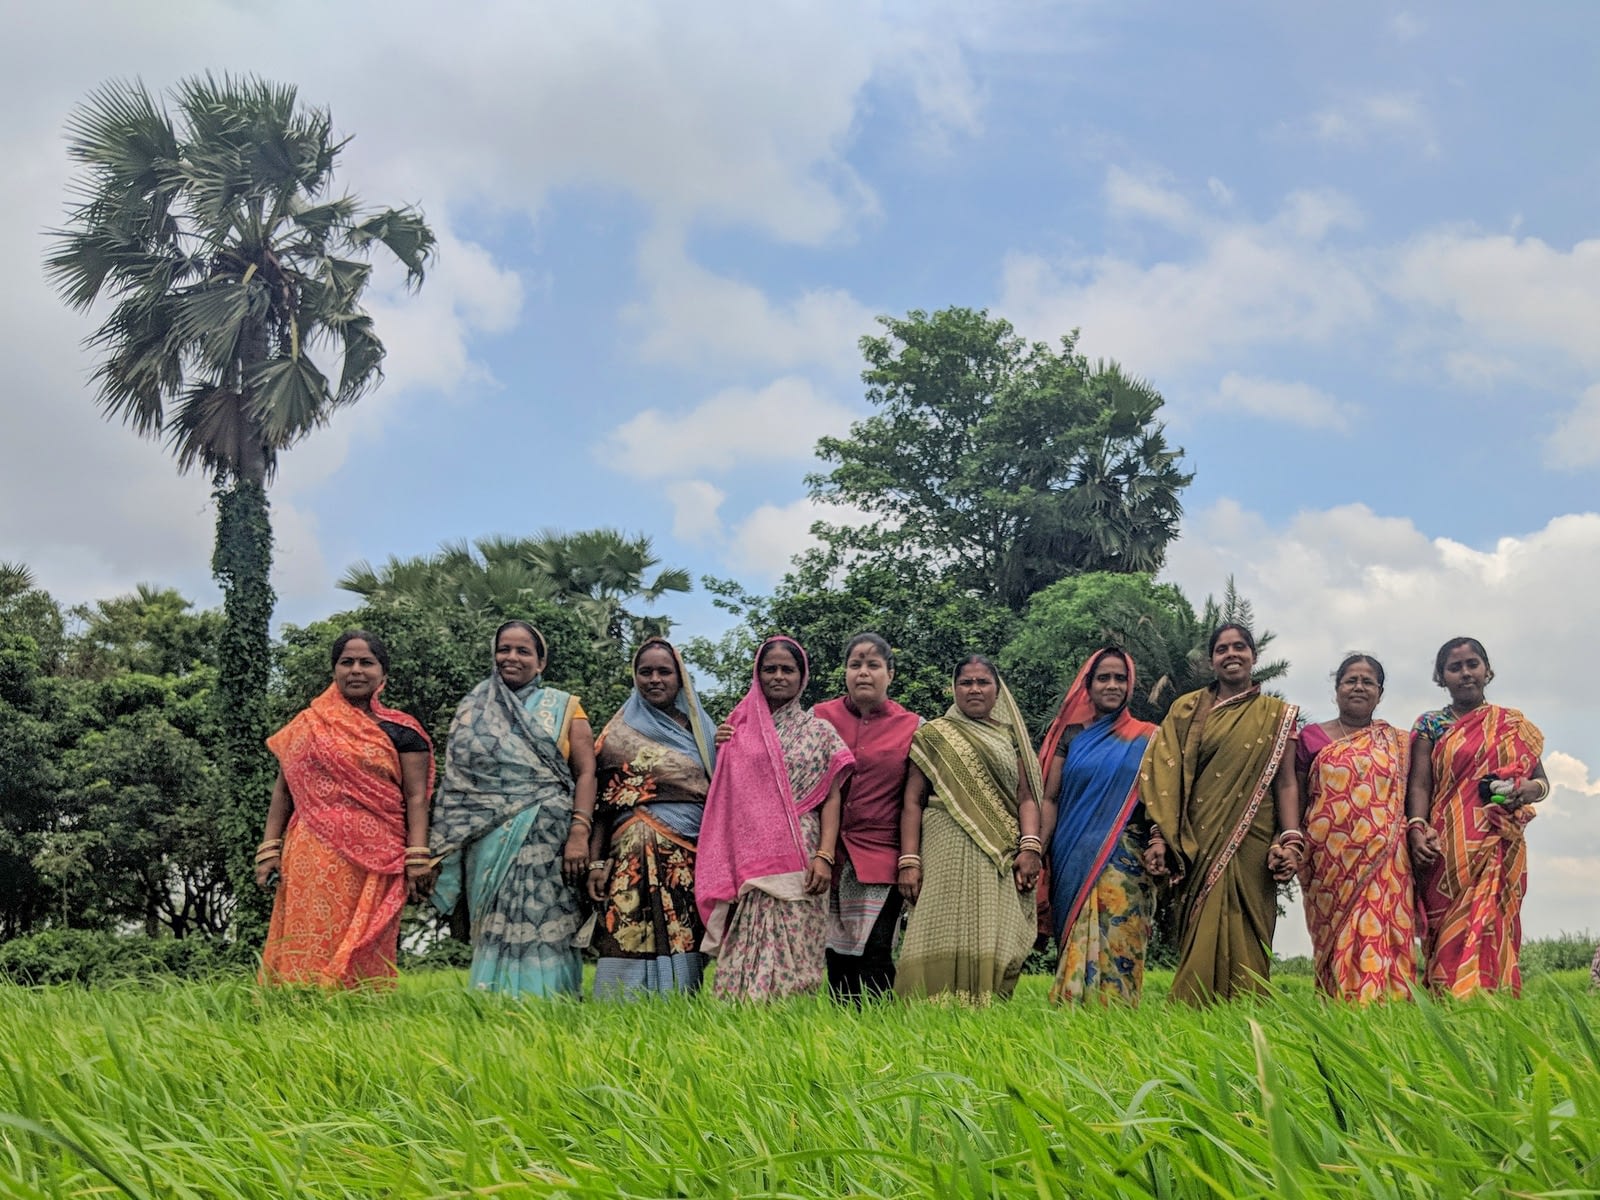 In Odisha and Bihar, CSISA has leveraged the social capital of women's self-help groups formed by the government and other civil society partners and which offer entry points for training and social mobilization, as well as access to credit. (Photo: CSISA)